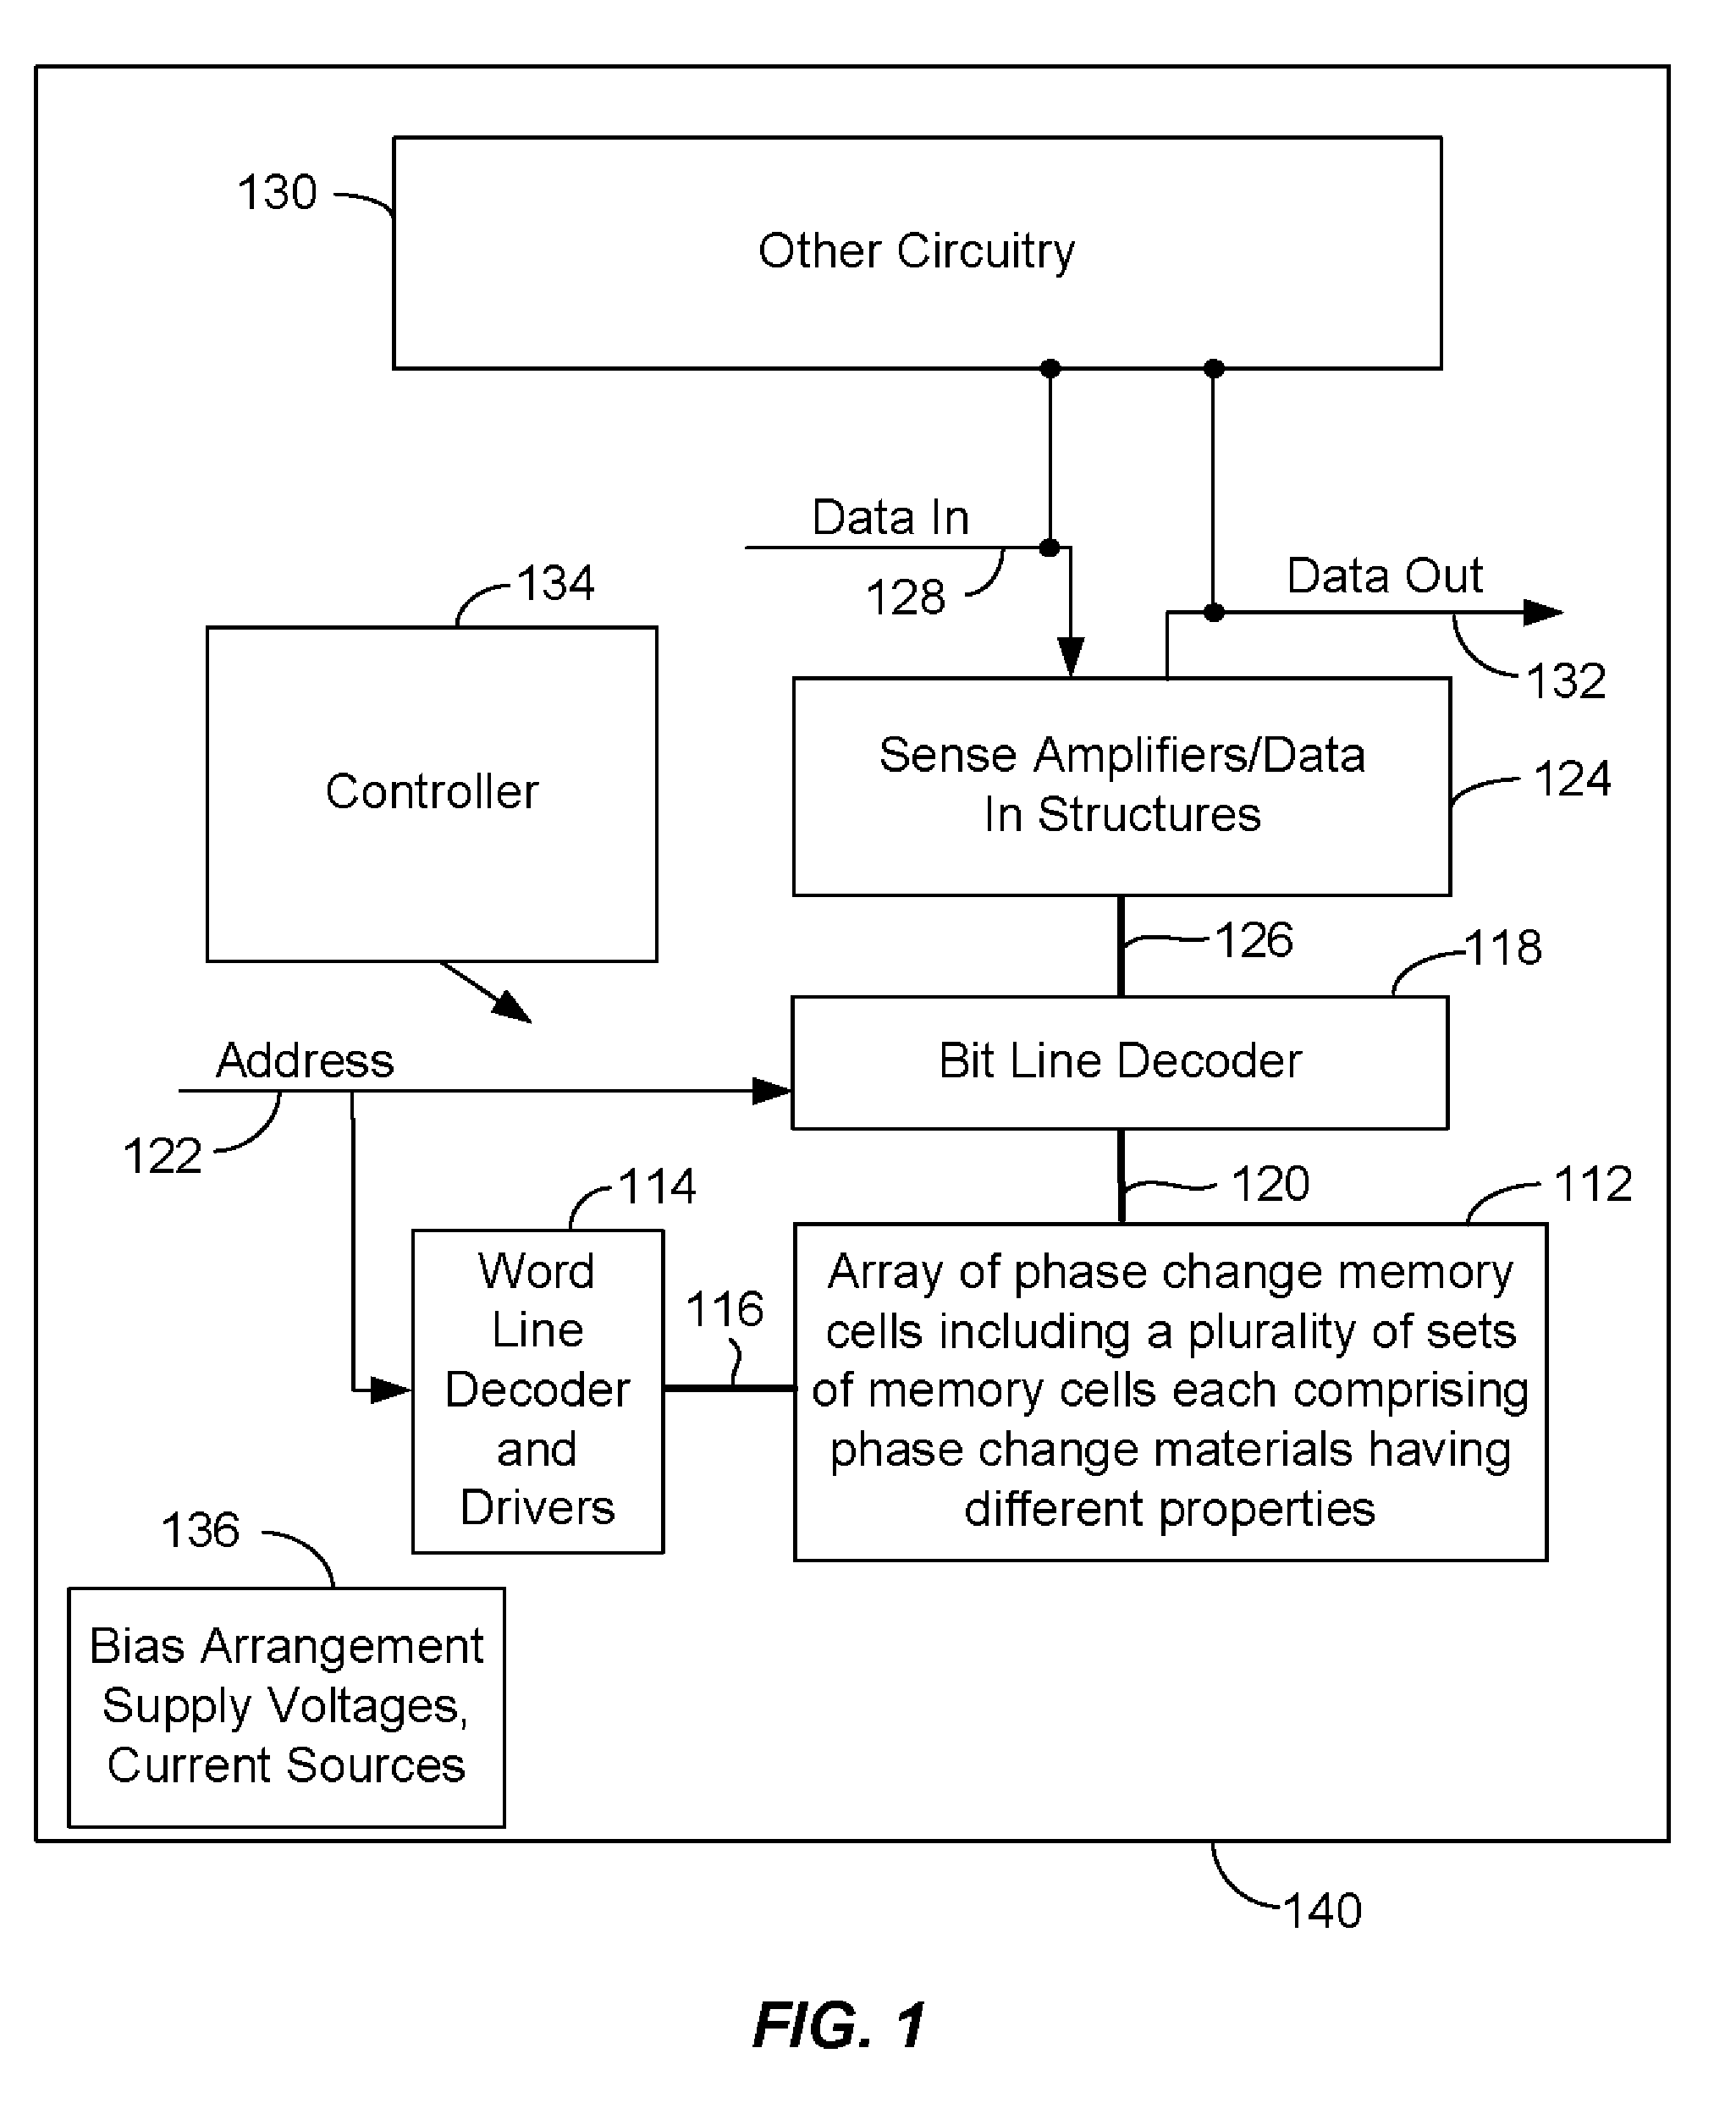 Multiple phase change materials in an integrated circuit for system on a chip application